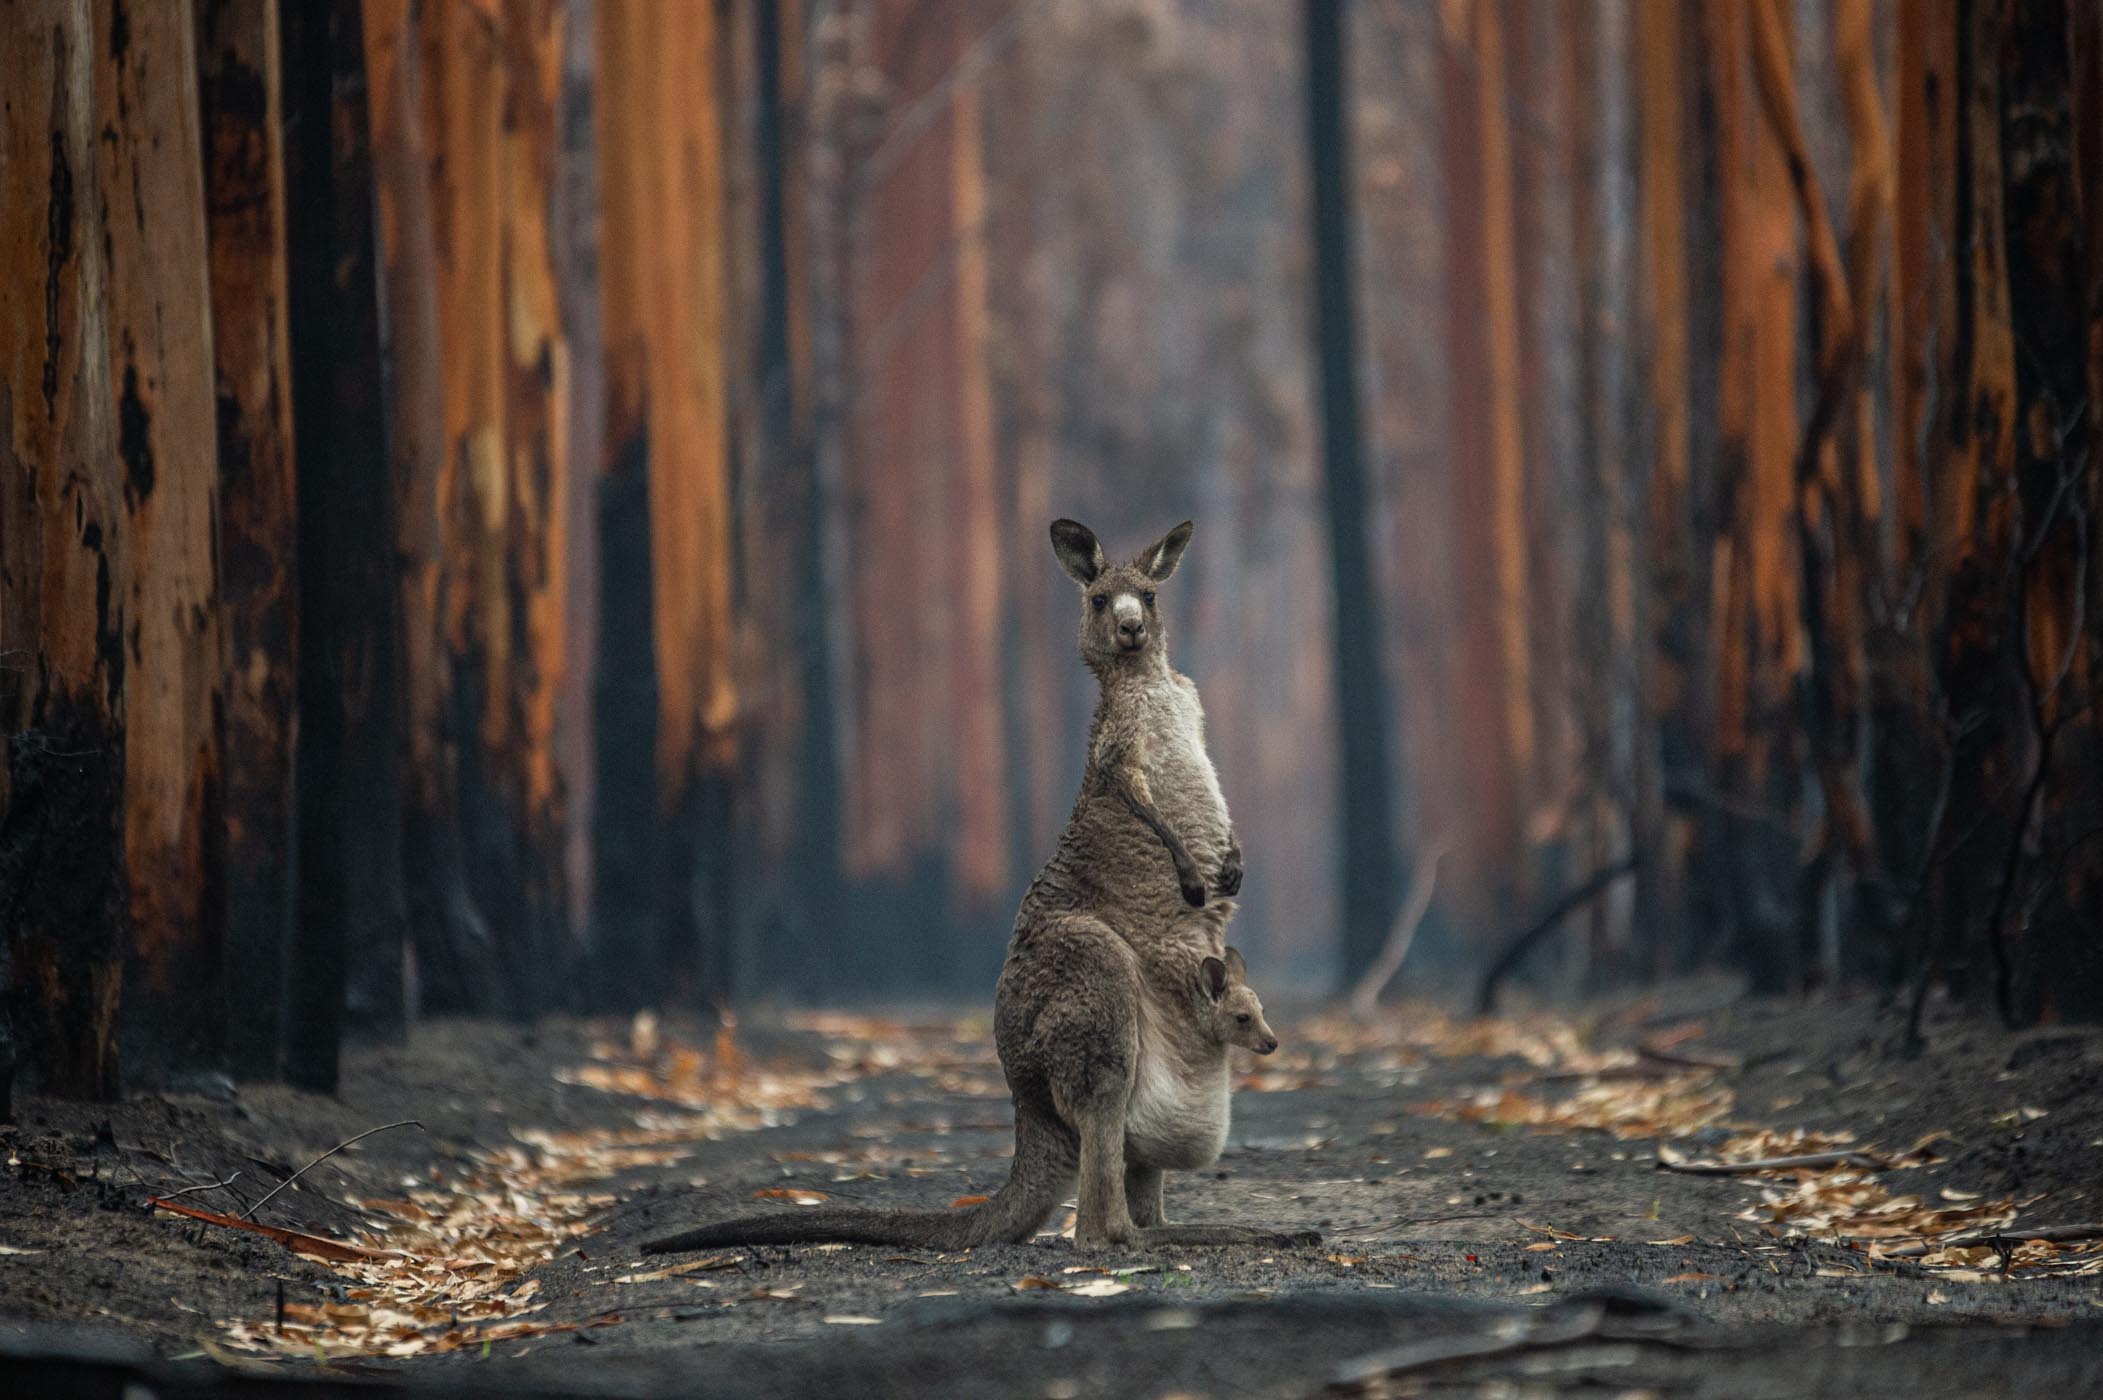 An Eastern grey kangaroo and her joey who survived the forest fires in Mallacoota. Australia, 2020. Jo-Anne McArthur / We Animals